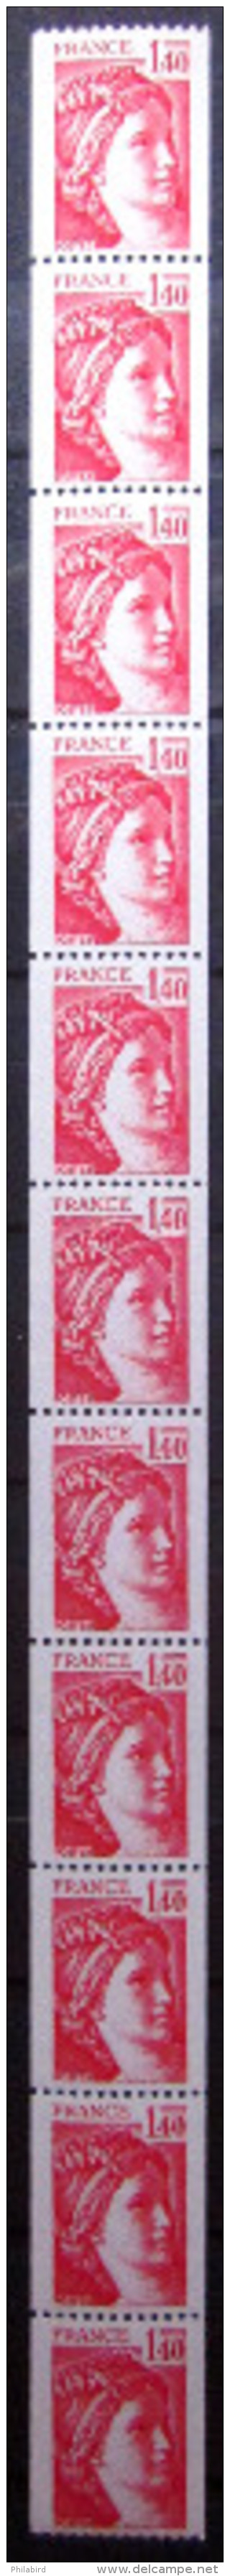 FRANCE            ROULETTE  76  (11 Timbres)            NEUF** - Rollen